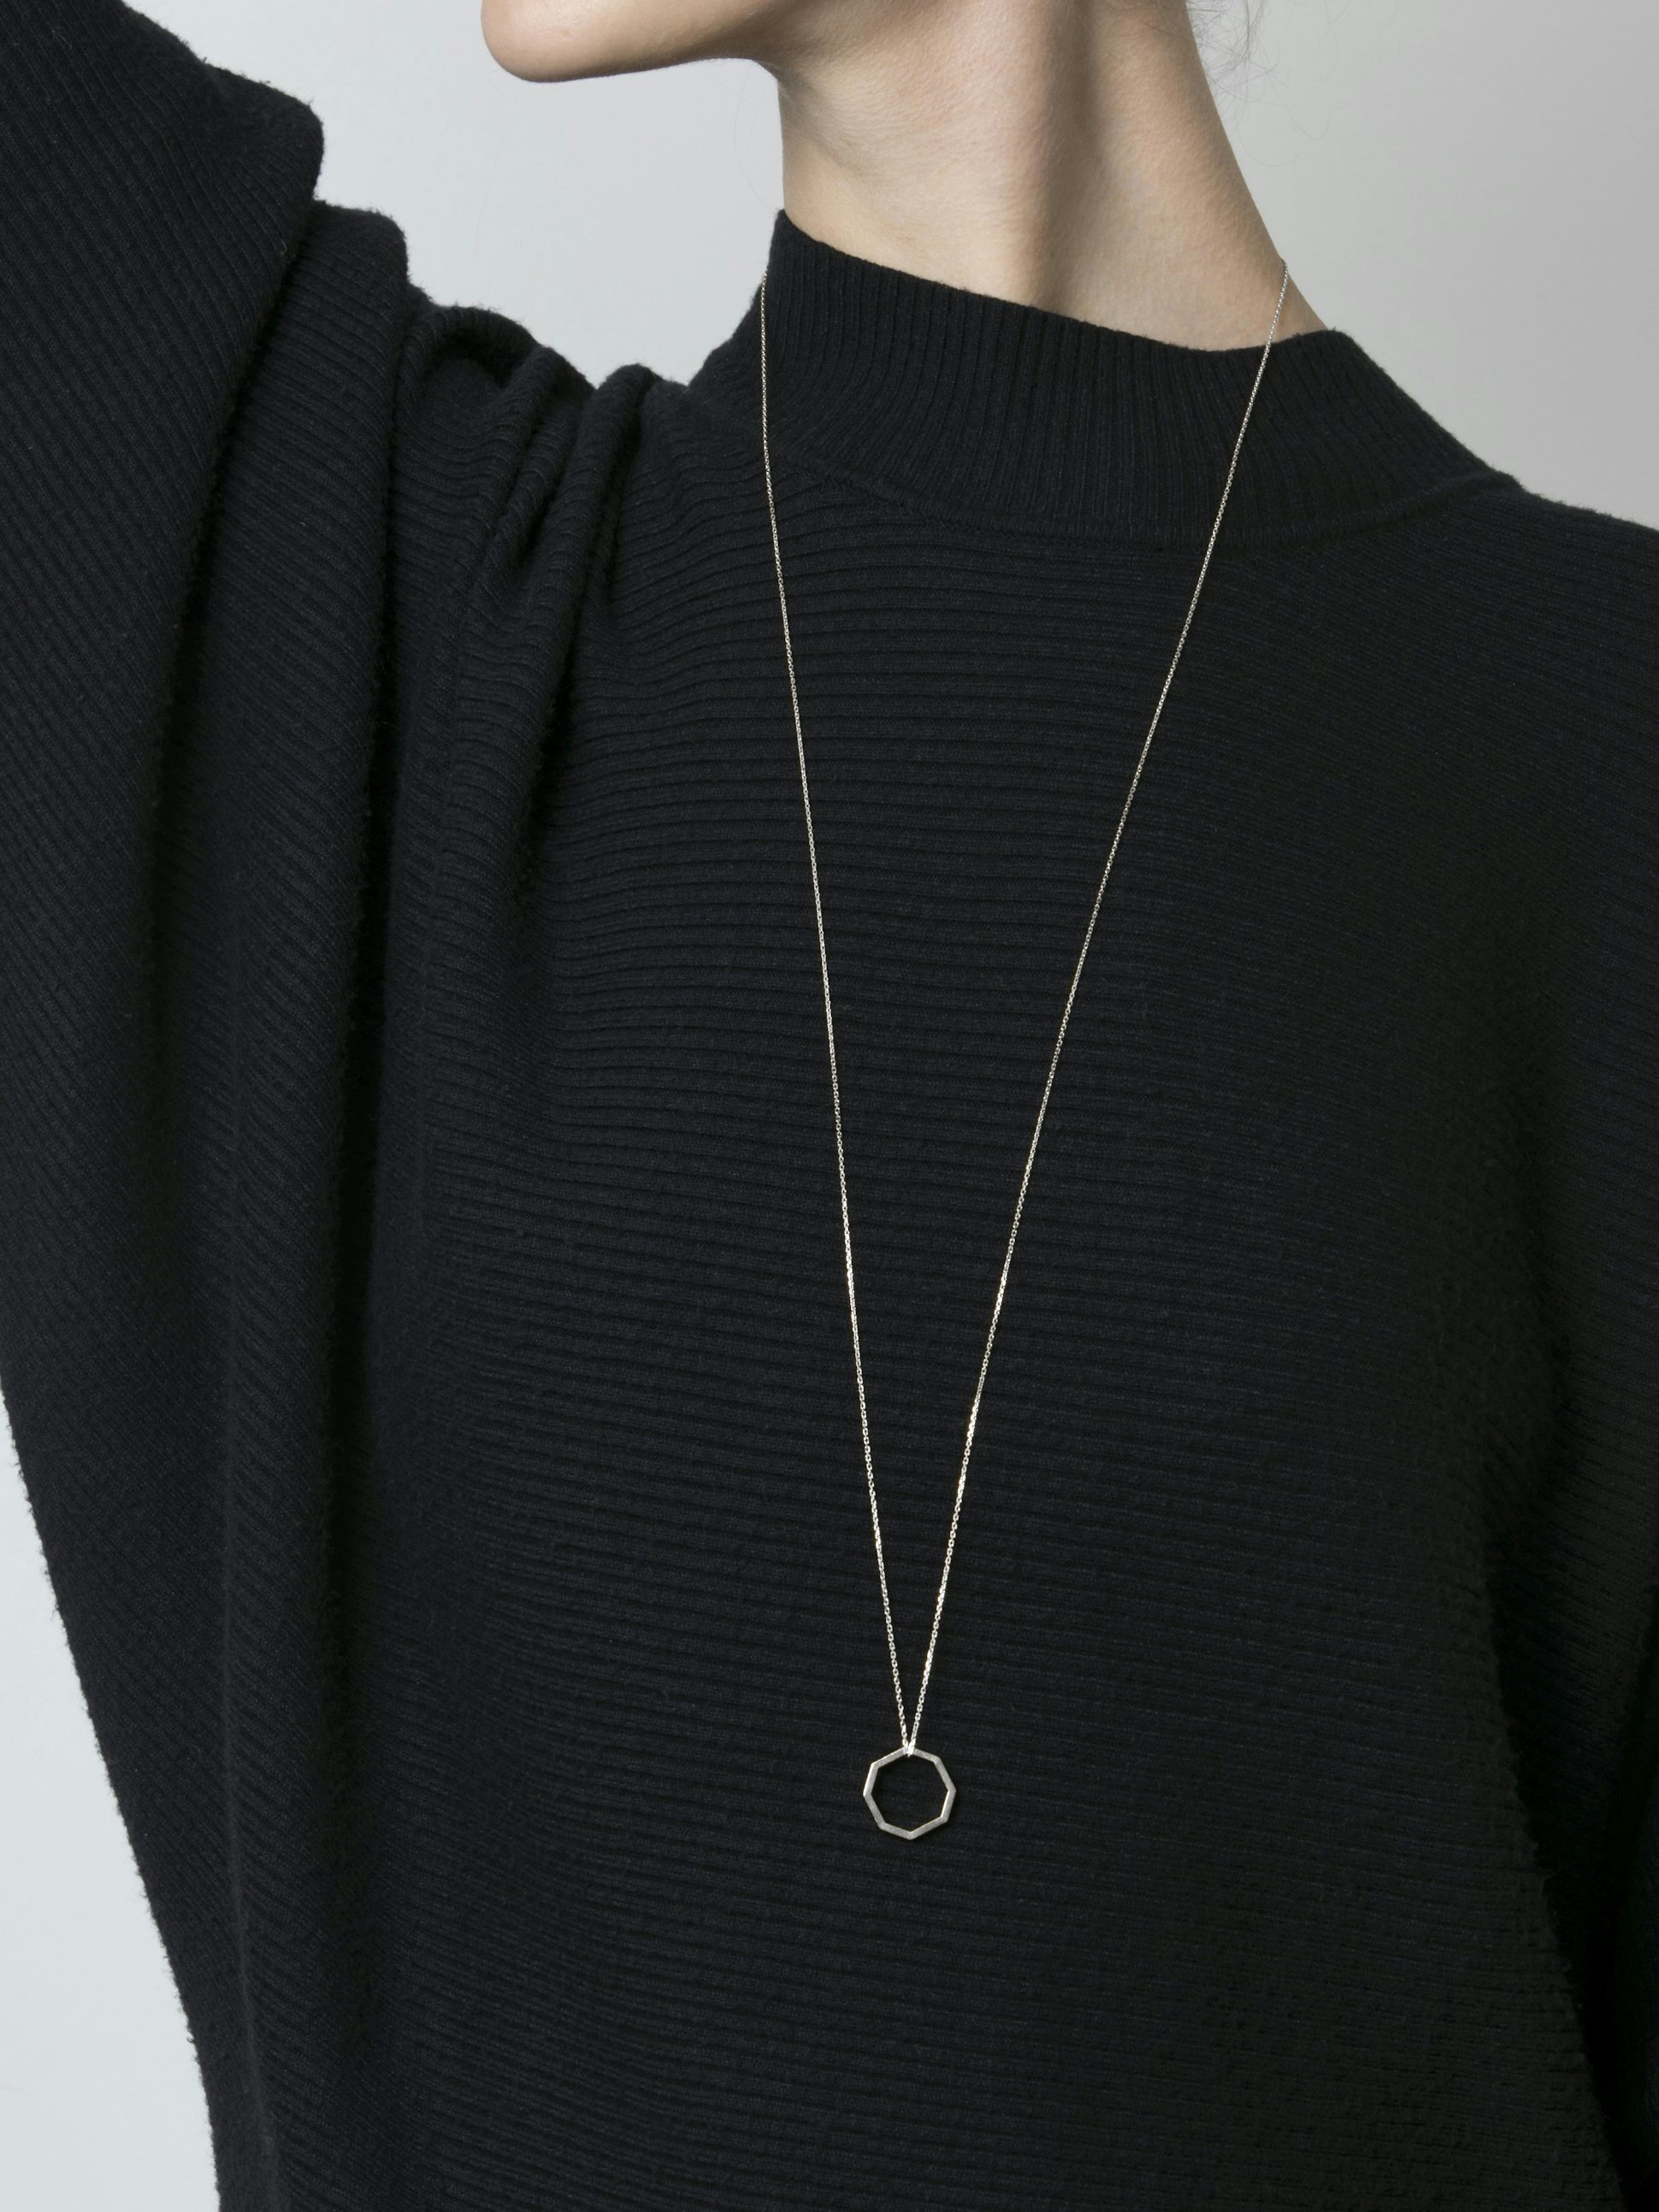 Octogone necklace with a 18mm pendant in 18k Fairmined ethical white gold, on a 88cm chain.